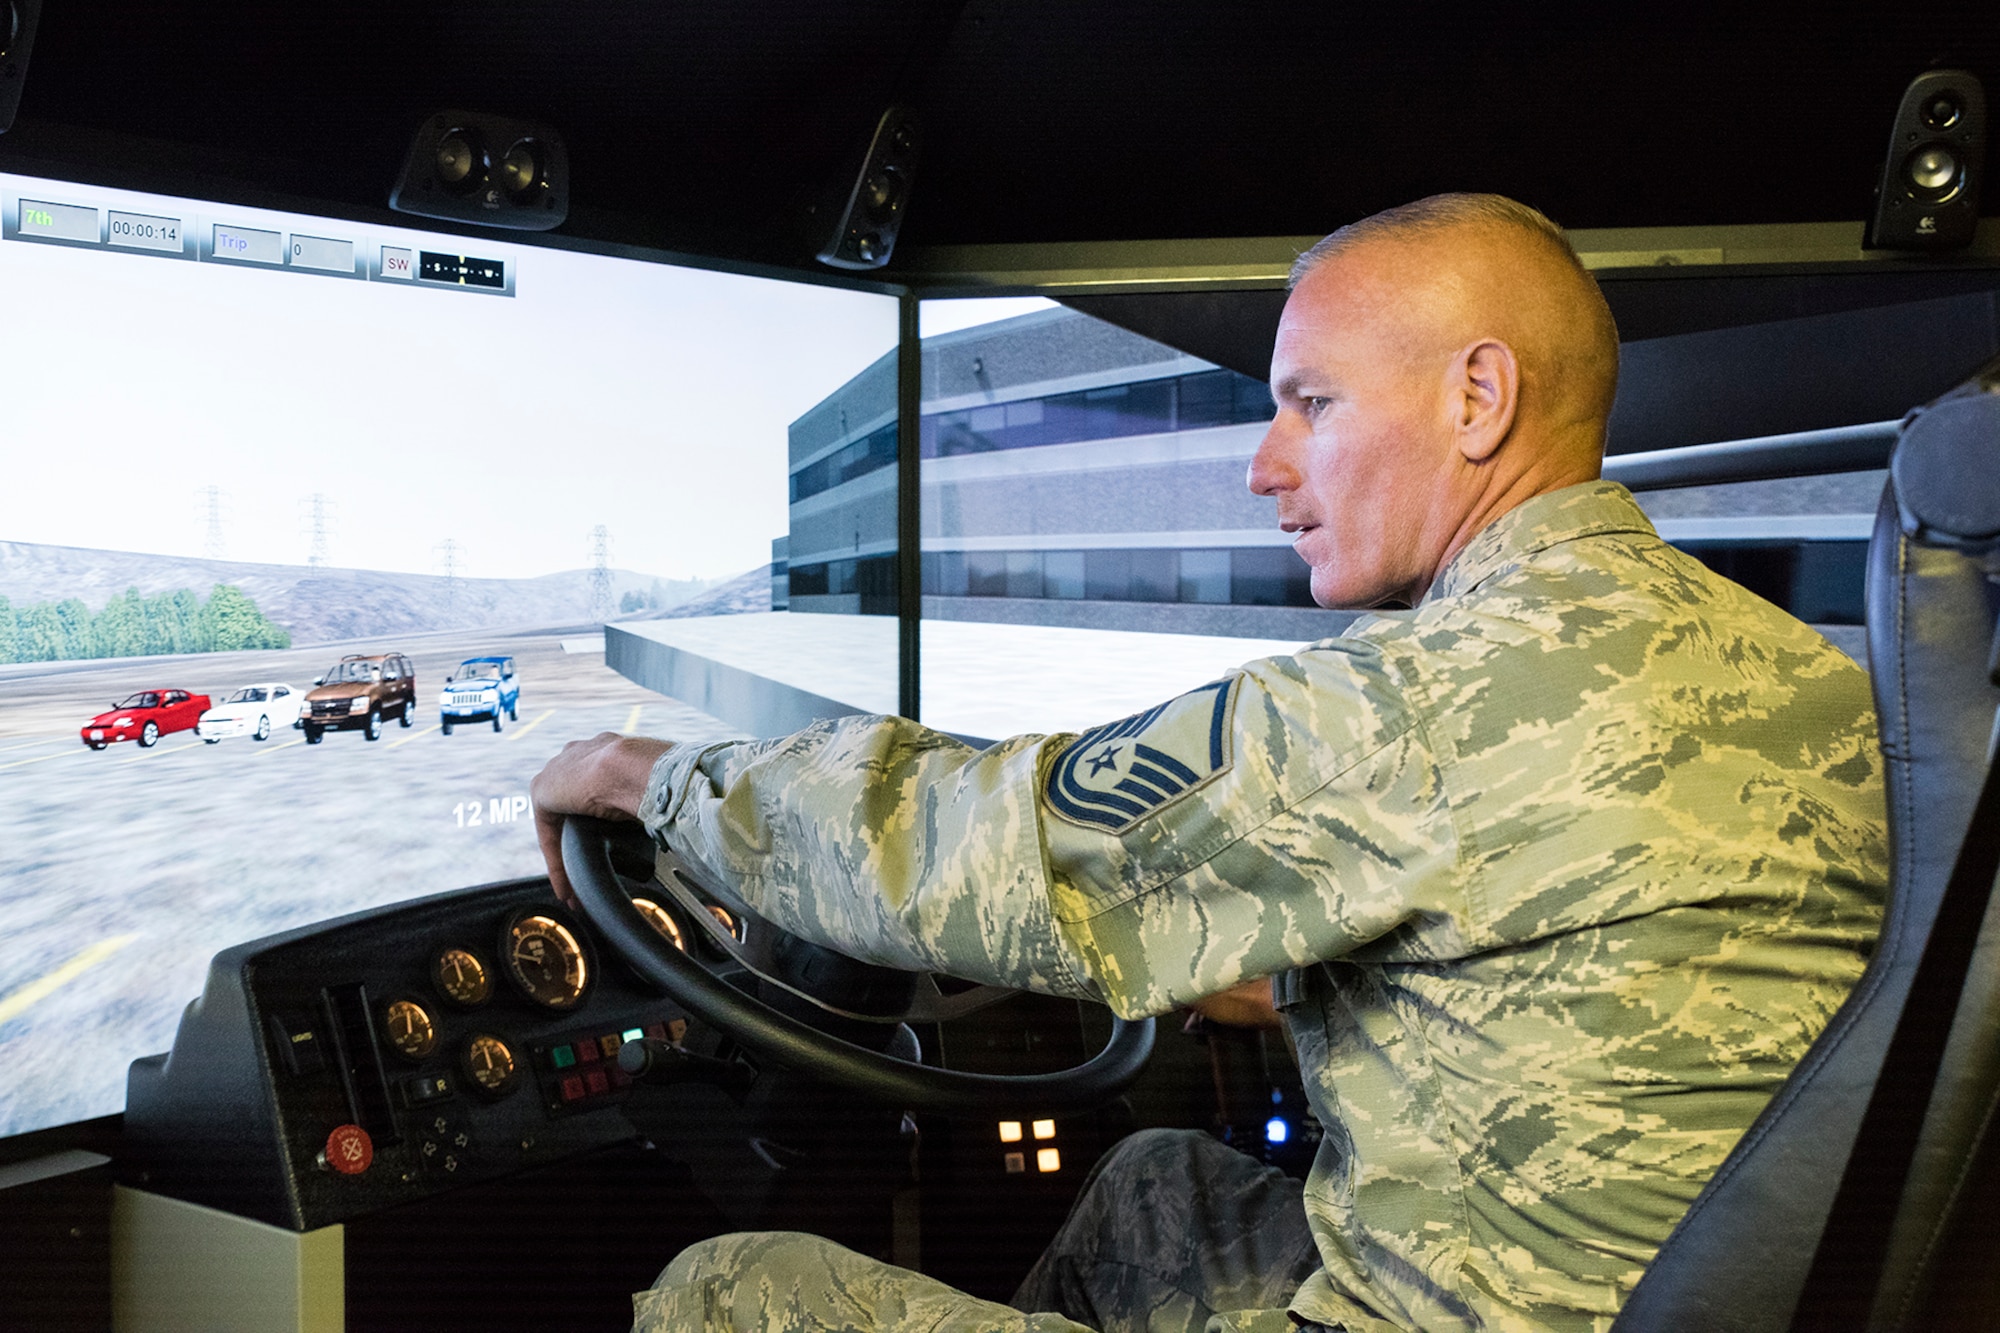 Master Sgt. Bryan Sutton, 188th RED HORSE instructor, demonstrates the 3T course's tractor-trailer simulator at Ebbing ANG Base, Ark., August 30, 2018. The 3T course teaches active, Guard and Reserve Airmen, as well as DOD civilian employees the skills needed to operate tractor-trailers effectively and be able to acquire a military or civilian commercial driver's license. (U.S. Air National Guard photo/Tech. Sgt. John E. Hillier)